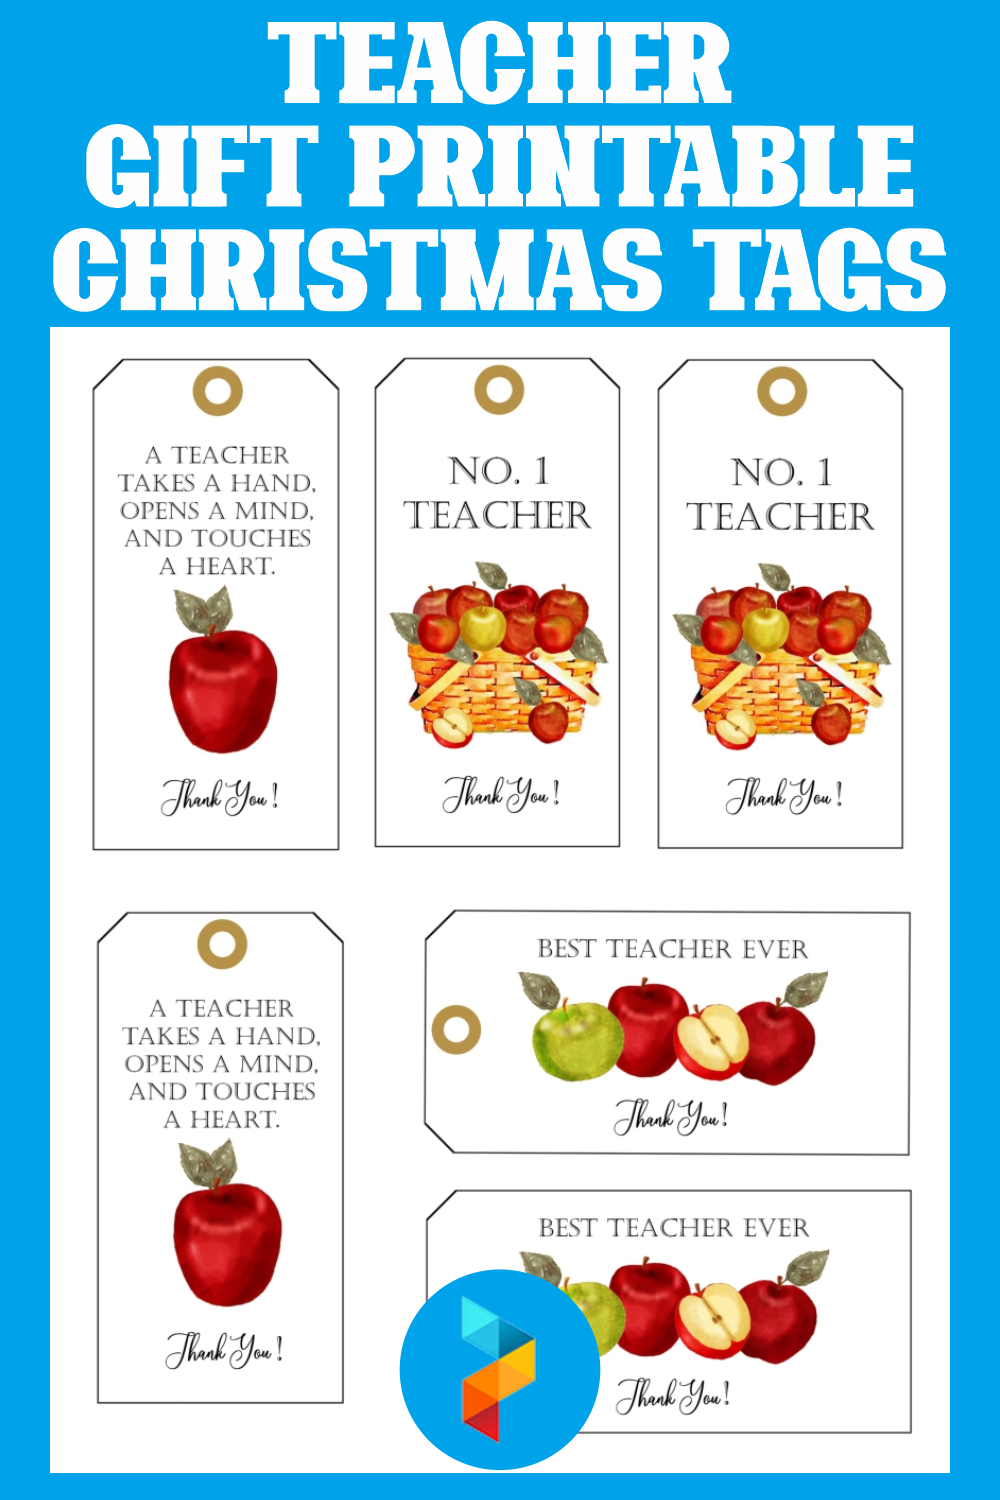 6 Best Teacher Gift Free Printable Christmas Tags PDF For Free At 